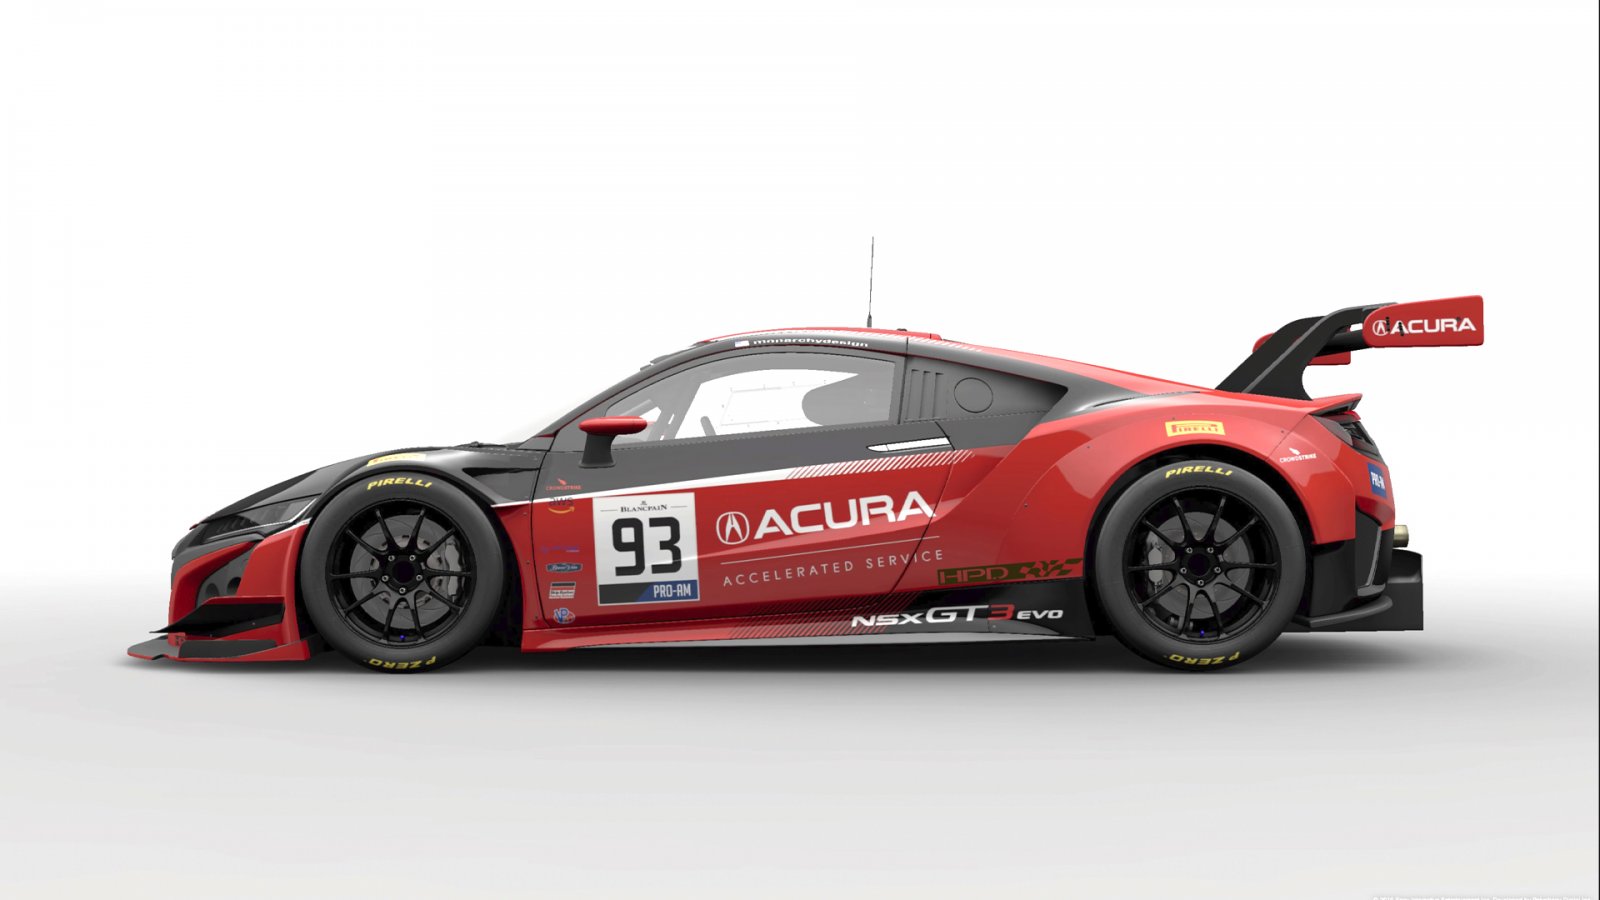 Trent Hindman and Shelby Blackstock Team Up In NSX GT3 Evo To Run 2020 SRO GT World Challenge Americas